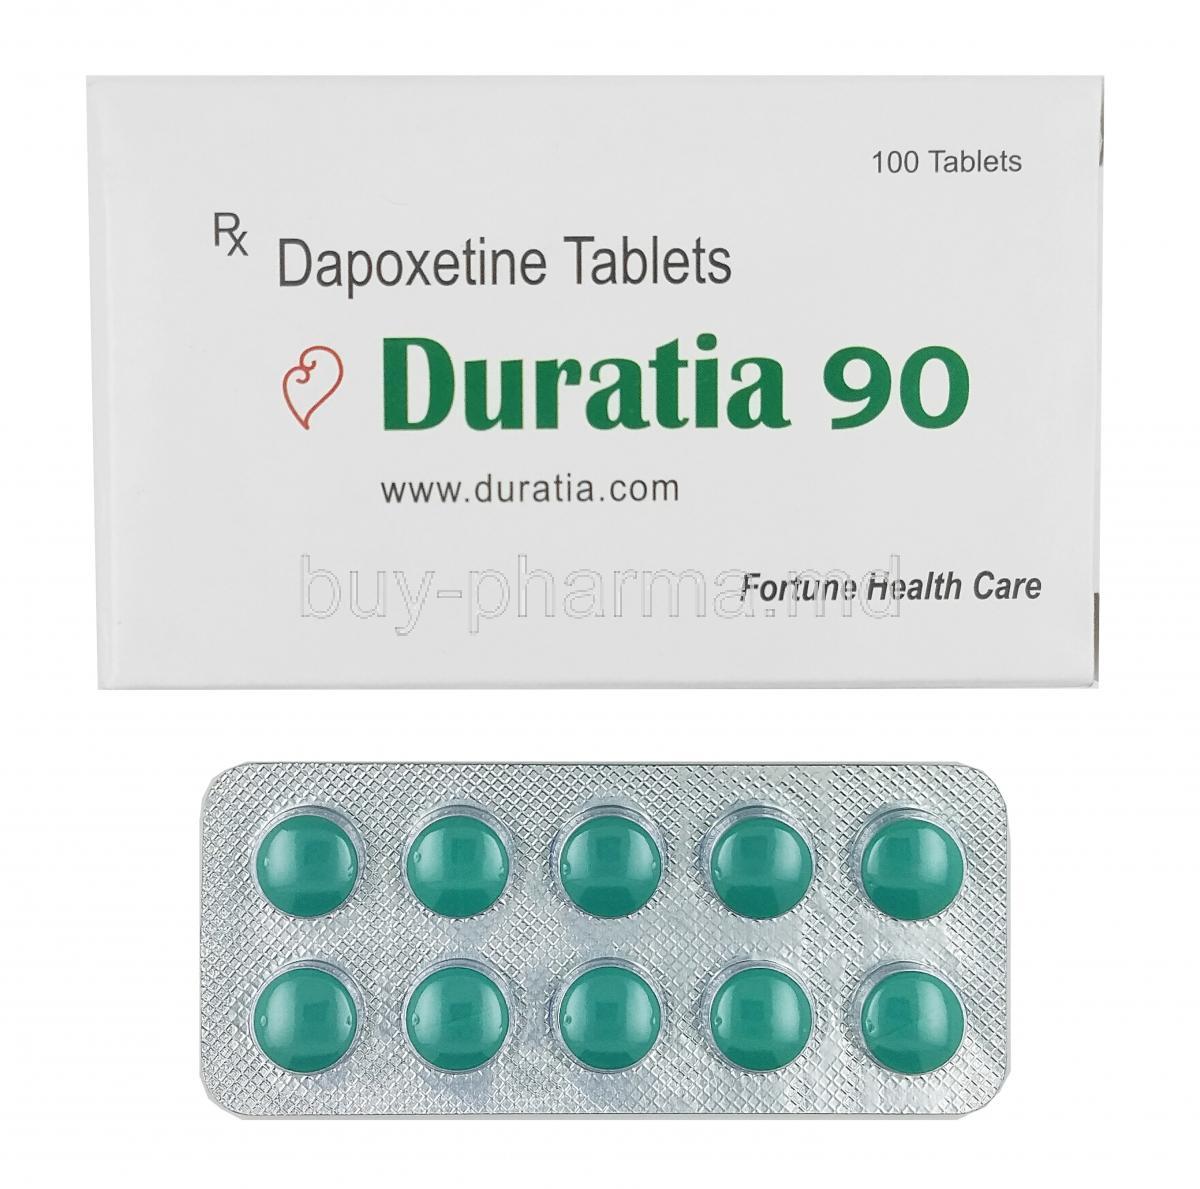 Duratia, Dapoxetine 90mg box and tablet